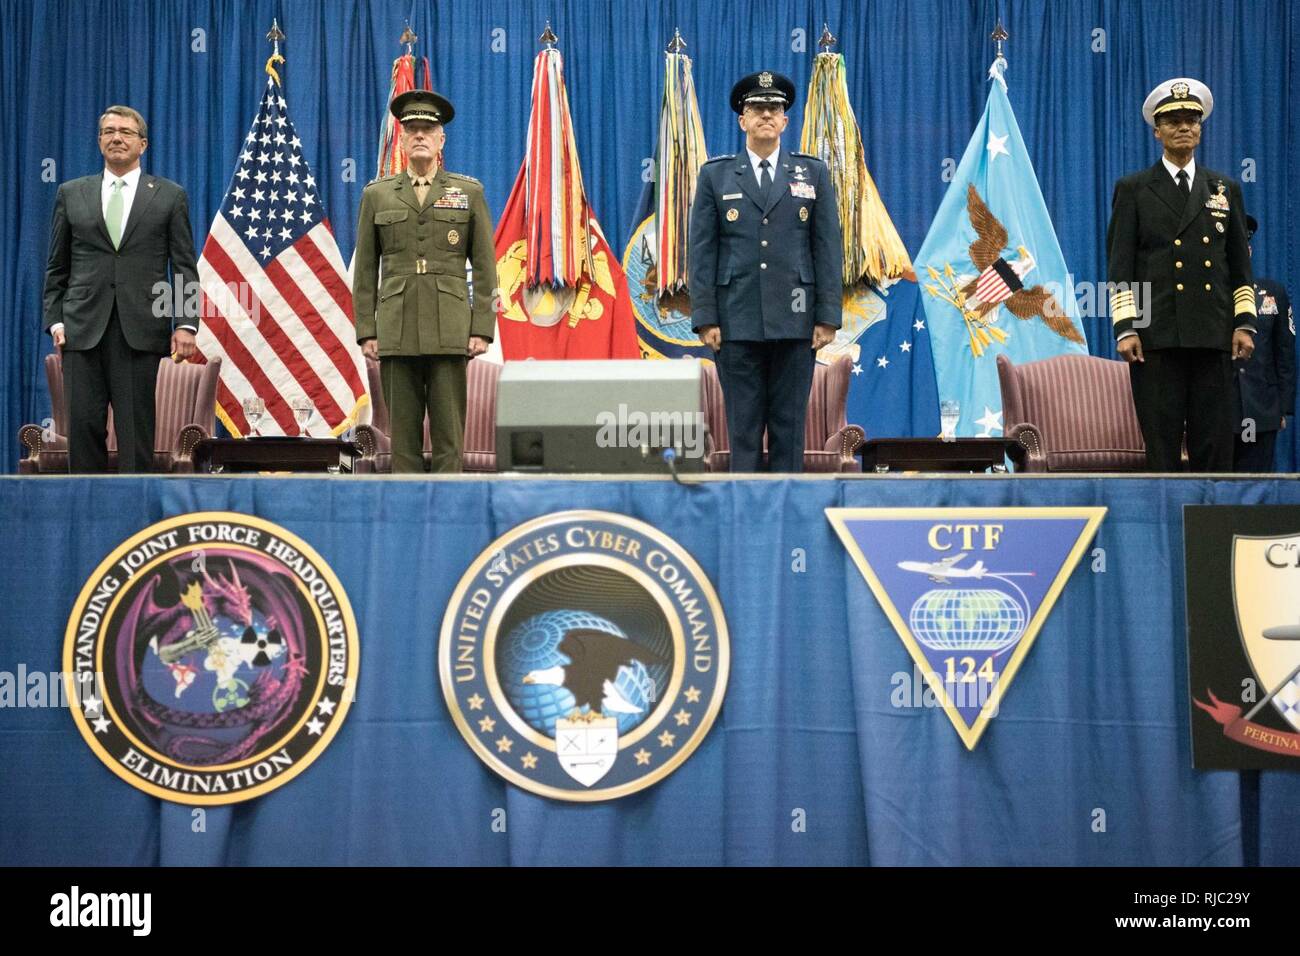 Defense Secretary Ash Carte and Marine Gen. Joseph F. Dunford Jr., chairman of the Joint Chiefs of Staff, participate in the Strategic Command change of command ceremony at Offutt Air Force Base, Omaha, Nebraska Nov. 3, 2016.  Air Force Gen. John E. Hyten assumes command from Navy Adm. Cecil D. Haney. Stock Photo